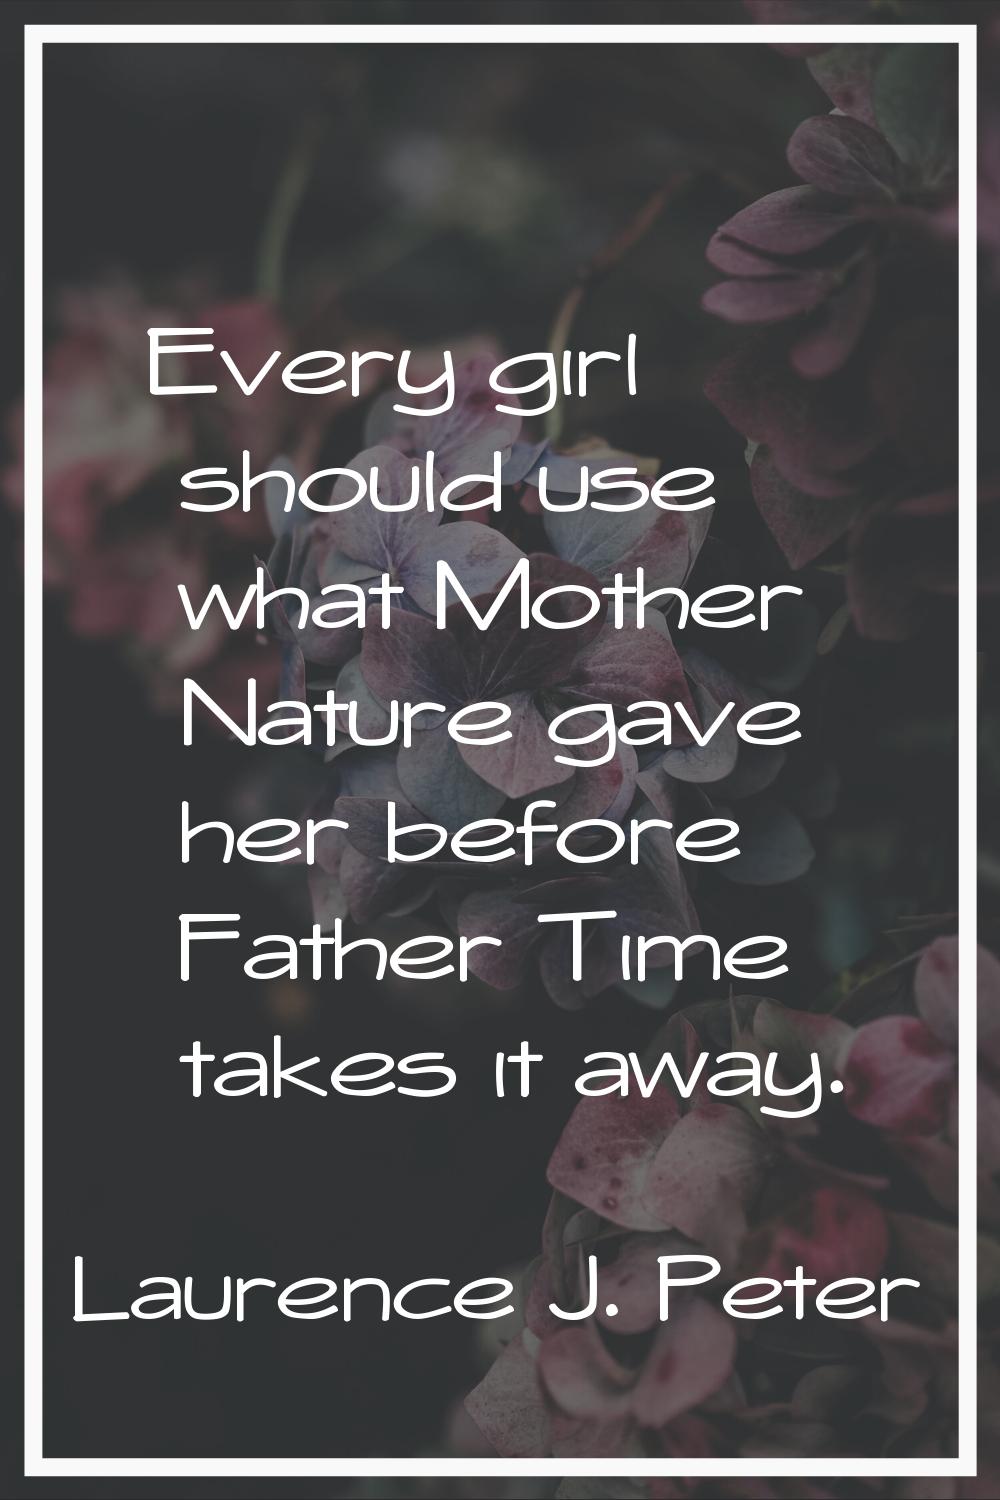 Every girl should use what Mother Nature gave her before Father Time takes it away.